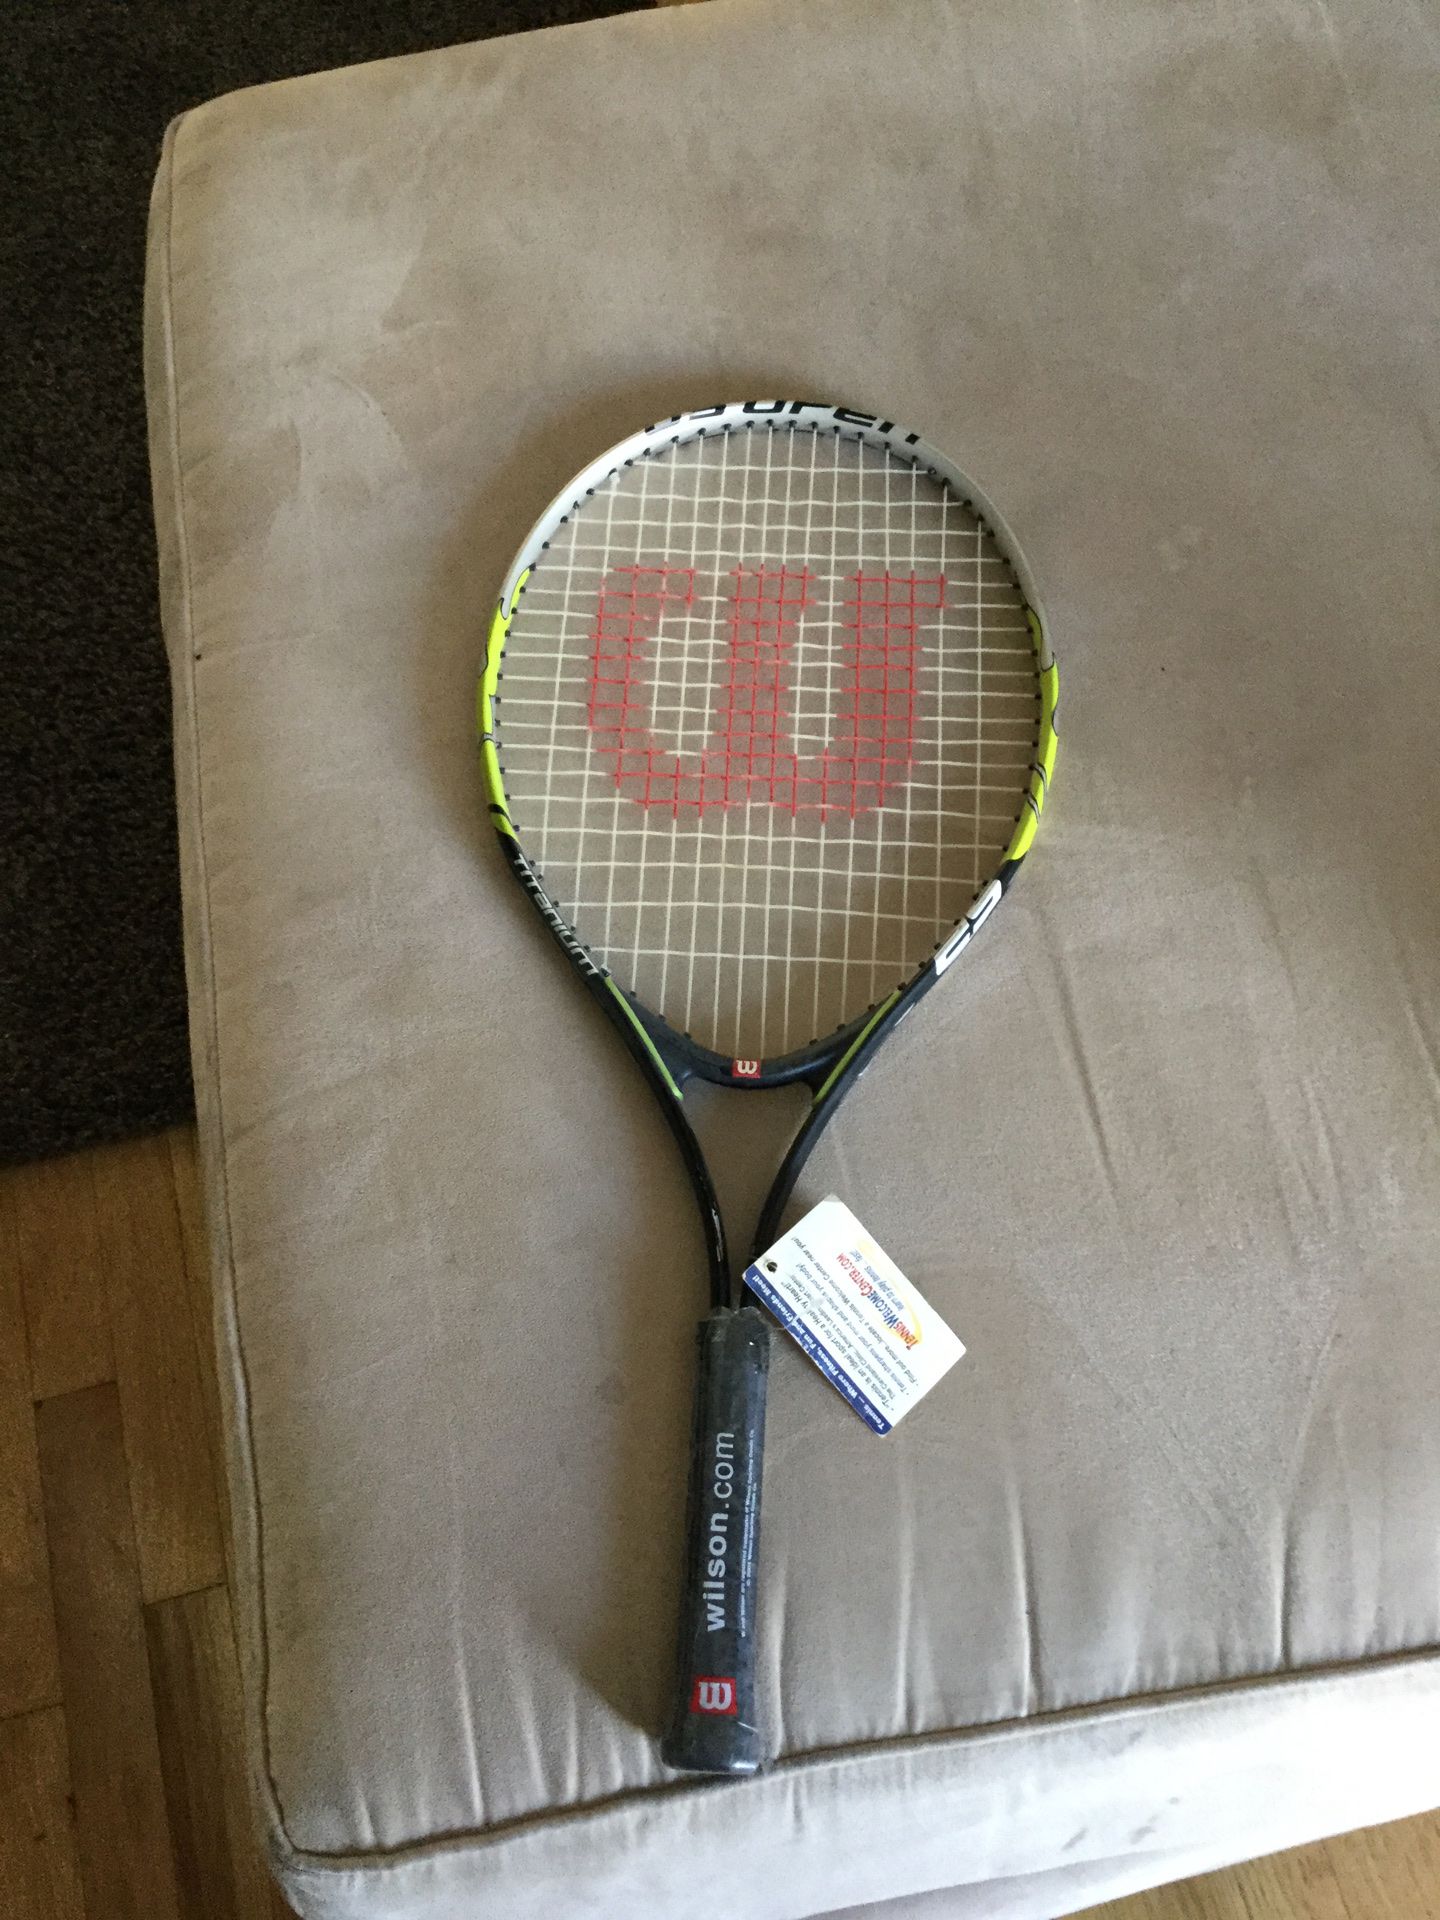 Tennis Racket for left handed players (kids or early teens)